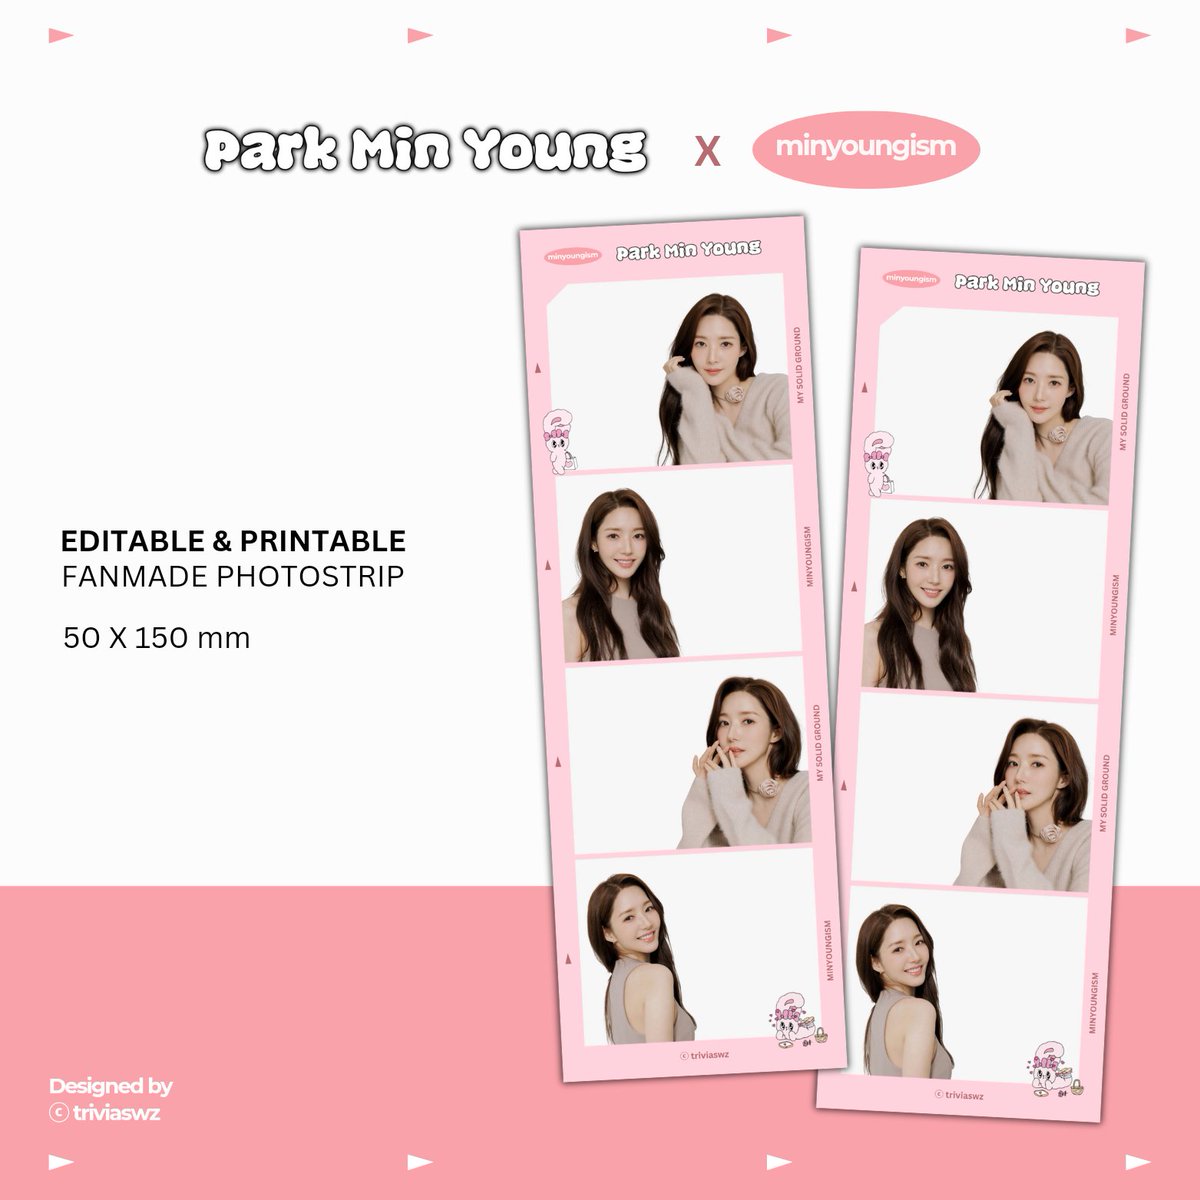 #ParkMinYoung X MINYOUNGISM
Editable & Printable Fanmade Photostrip
ⓒ triviaswz

ᕱ⑅ᕱ bit.ly/minyoungism

🩷 Credits will be appreciated! ✨️
╳ Do not use for commercial purposes ╳

#내남편과결혼해줘 #내남결
#박민영 #パクミニョン #朴敏英 
#พัคมินยอง #MarryMyHusband